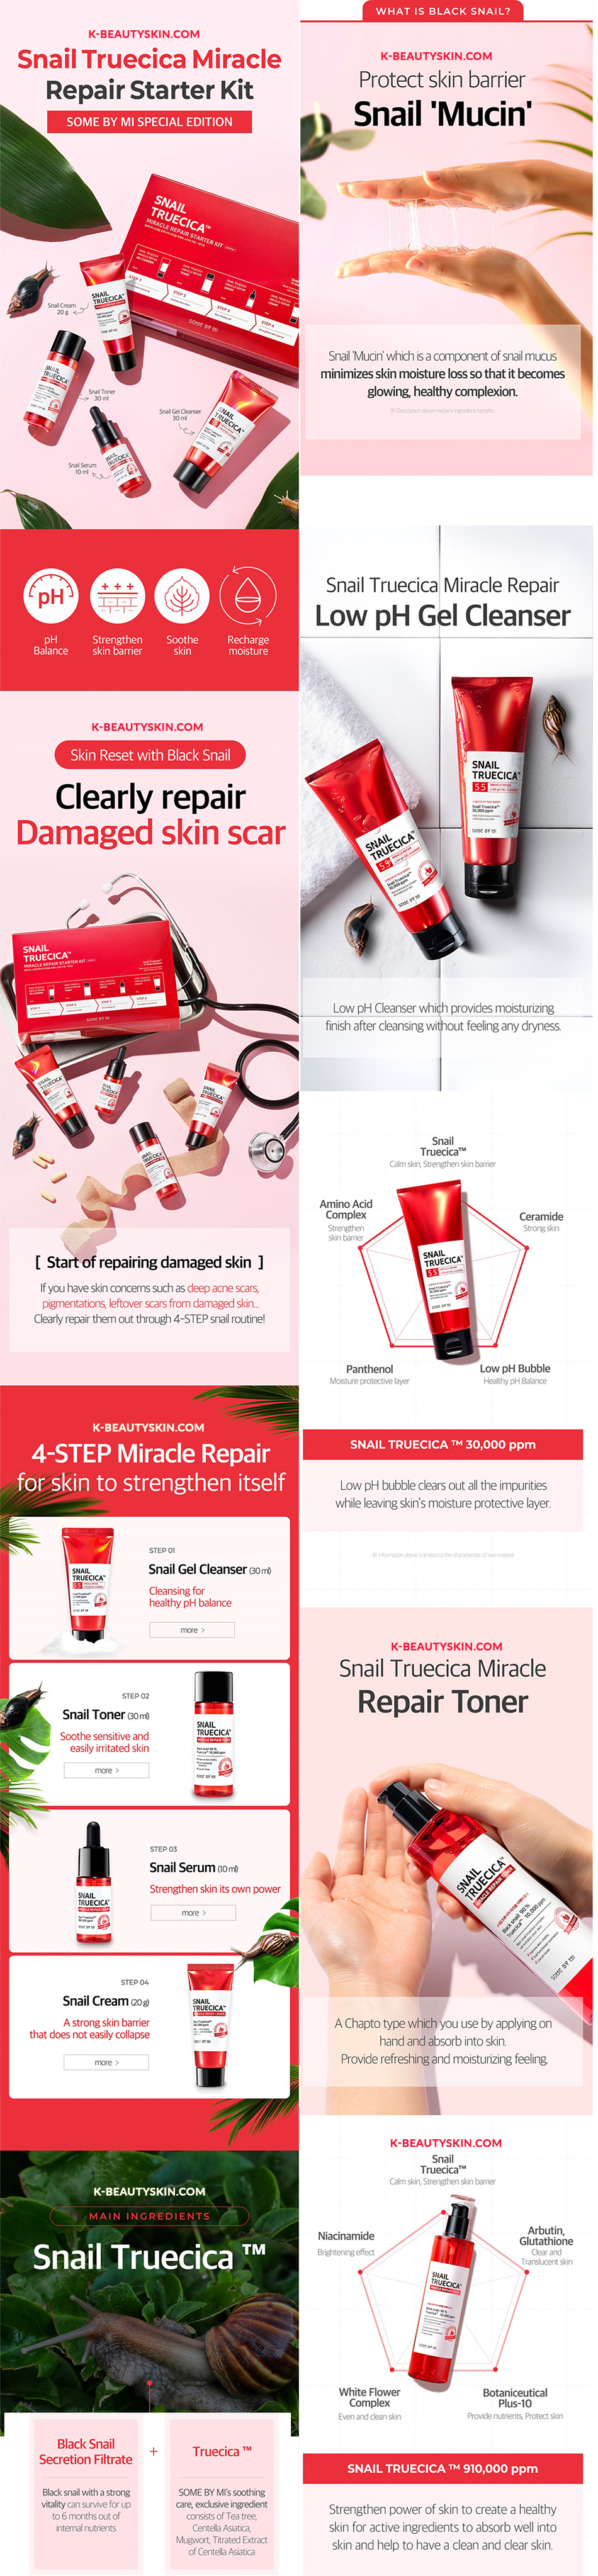 SOME BY MI Snail Truecica Miracle Repair Starter Kit review